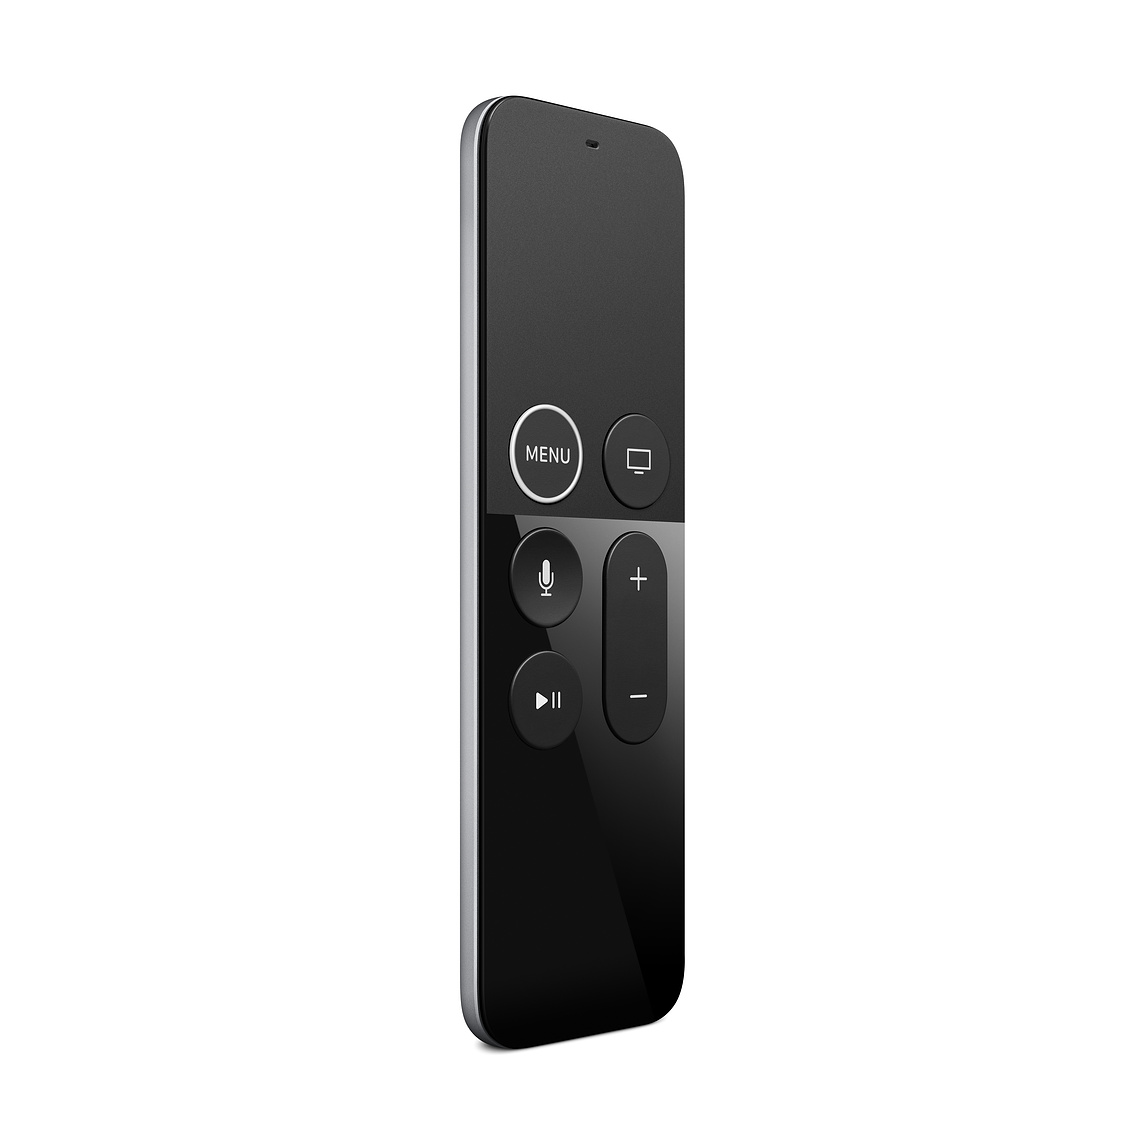 Apple TV Remote: What options control the Apple TV? - 9to5Mac